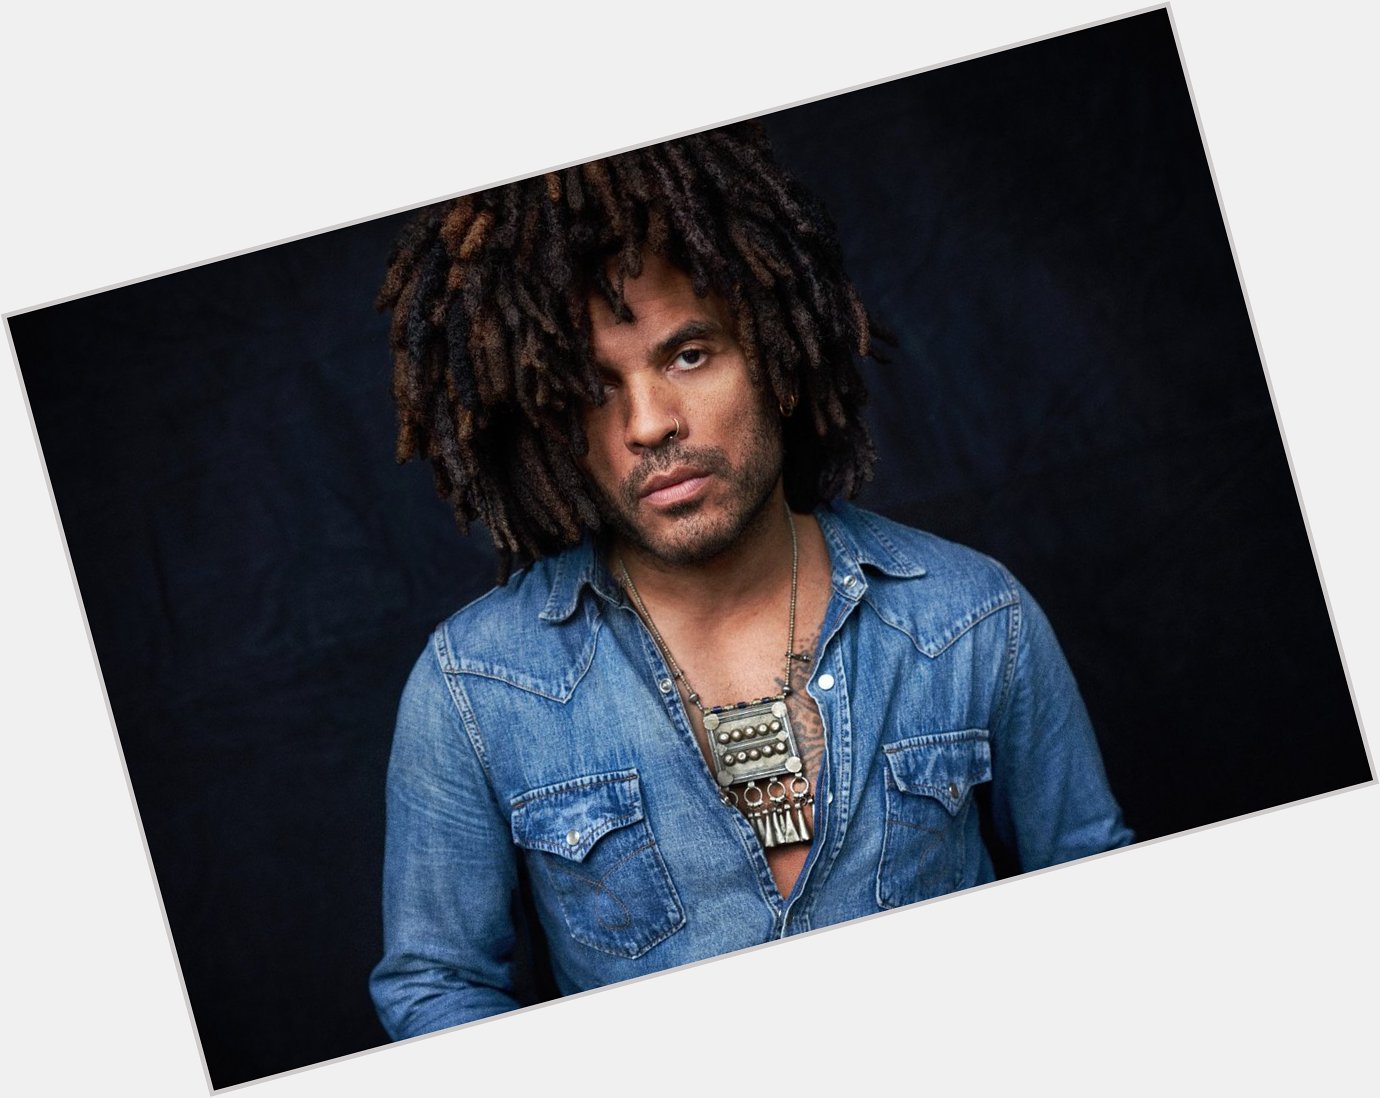 Happy Birthday to singer songwriter Lenny Kravitz, born on this day in New York City in 1964.    